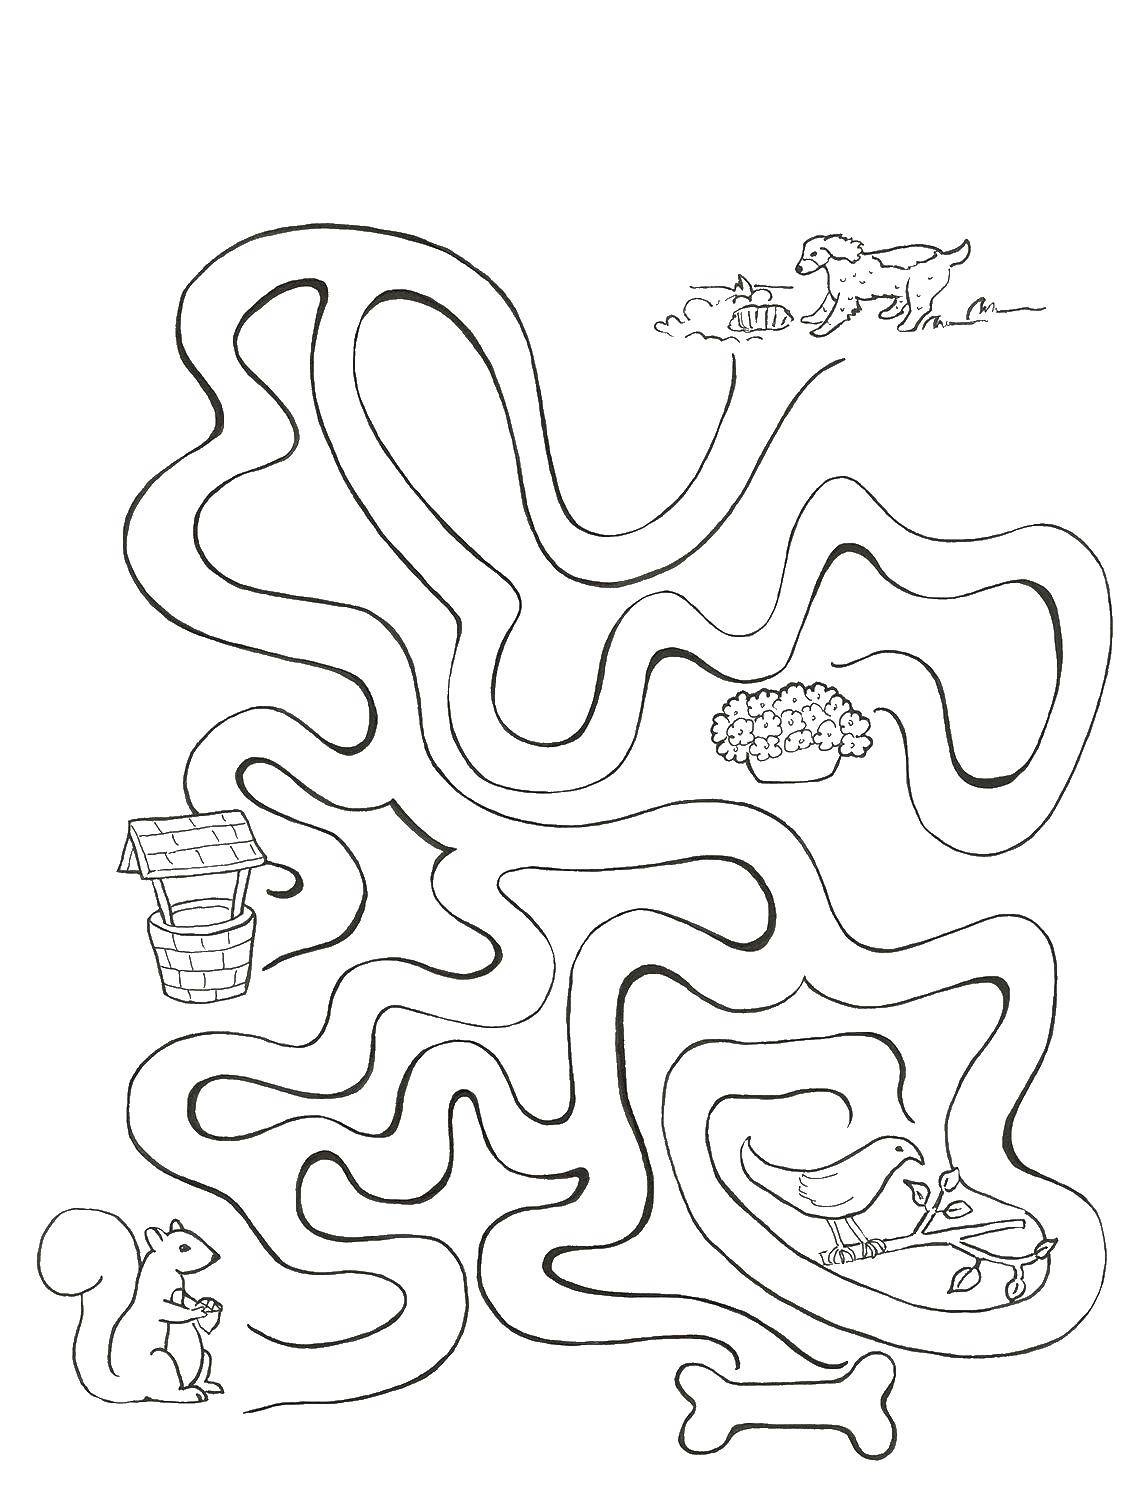 Coloring Help all to reach the food. Category Mazes. Tags:  Maze, logic.